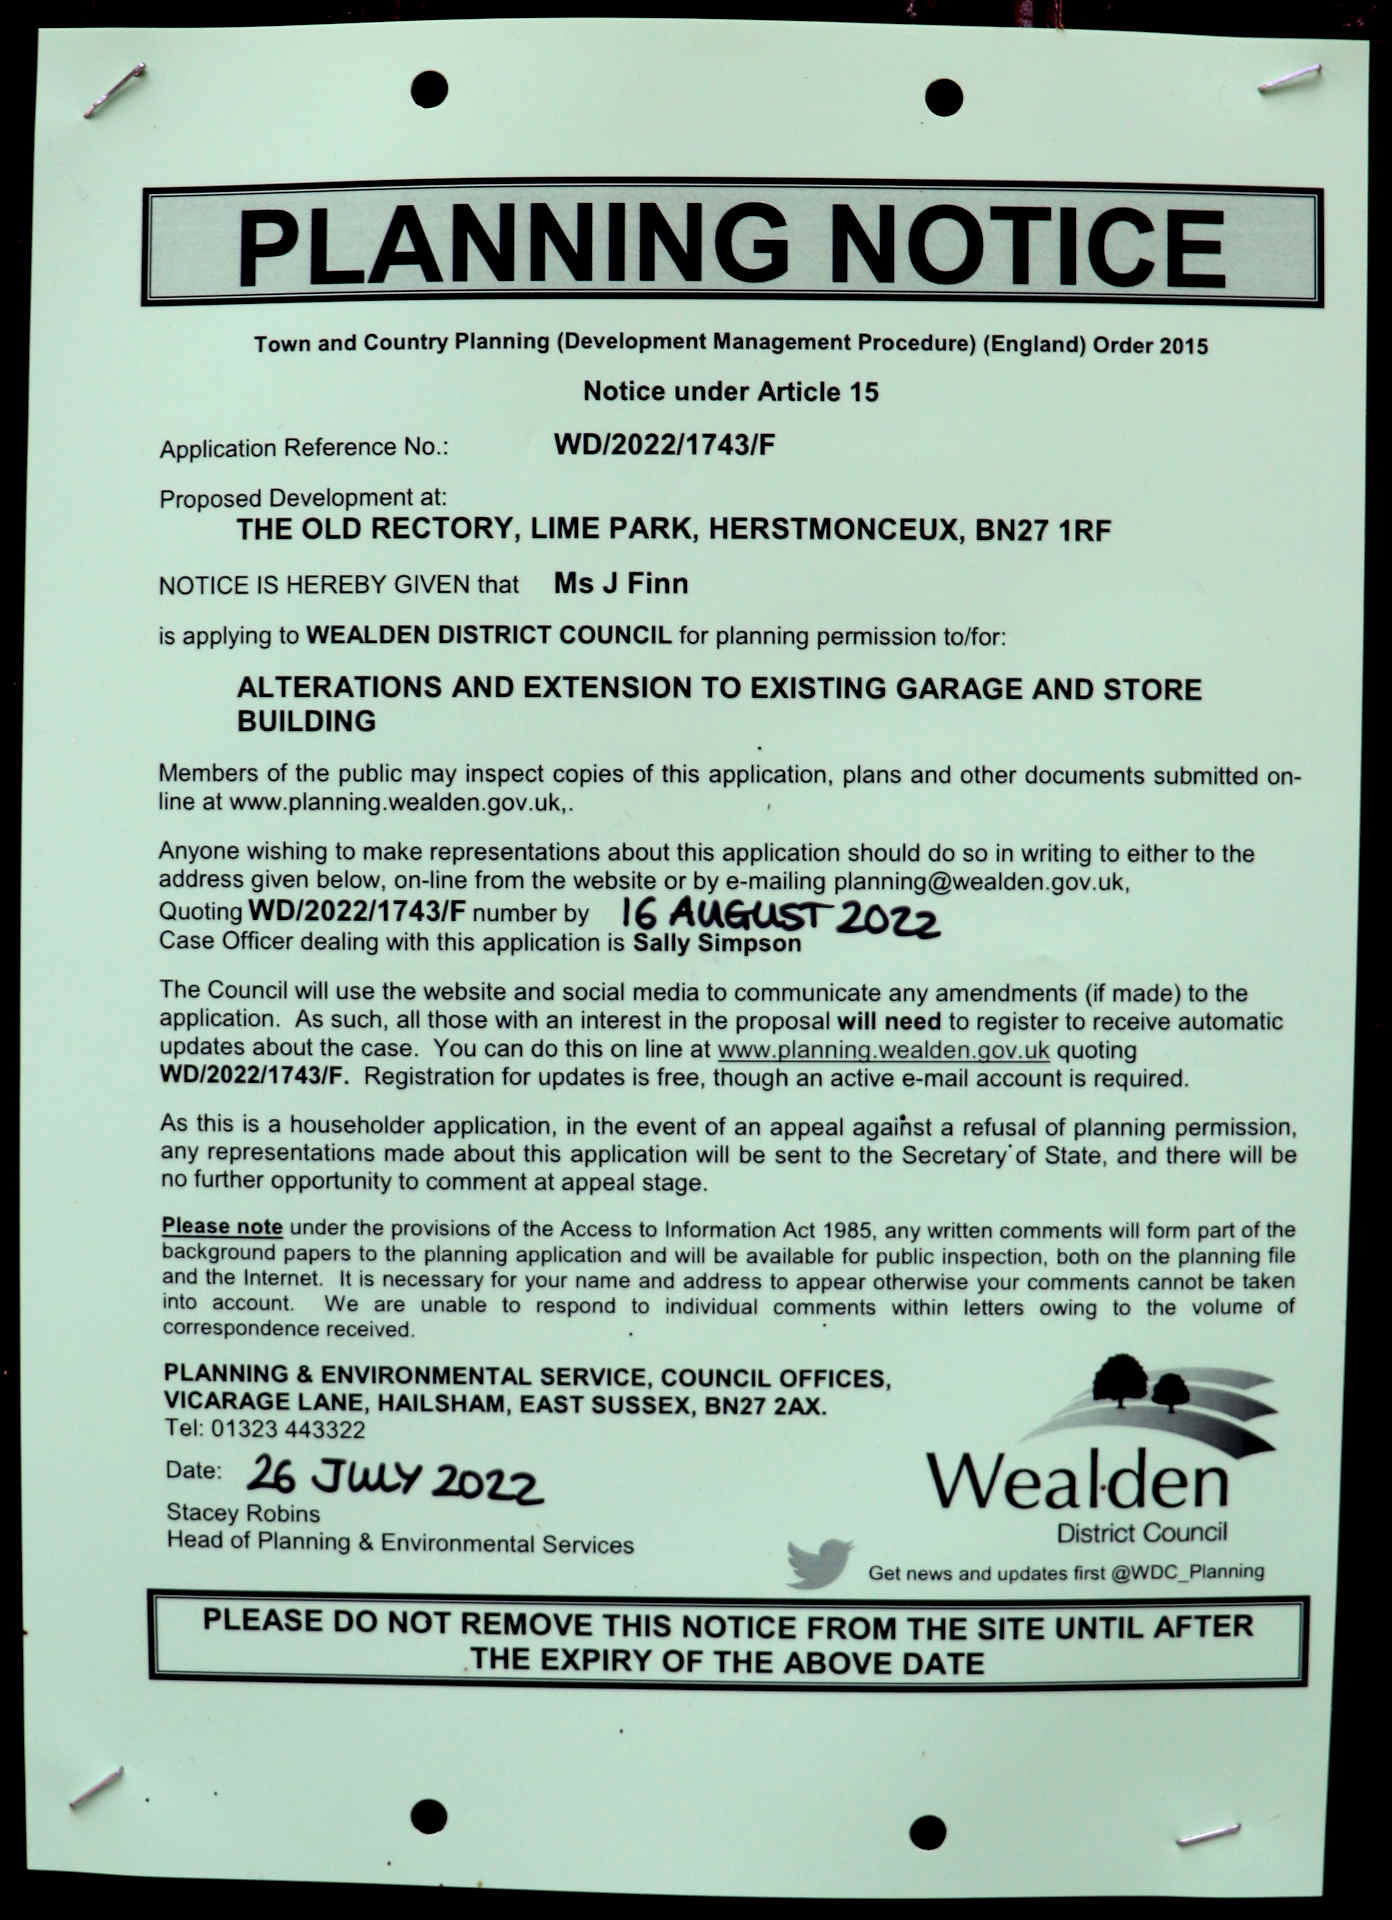 Planning Notice 26 July 2022, The Old Rectory, Herstmonceux, Wealden District Council